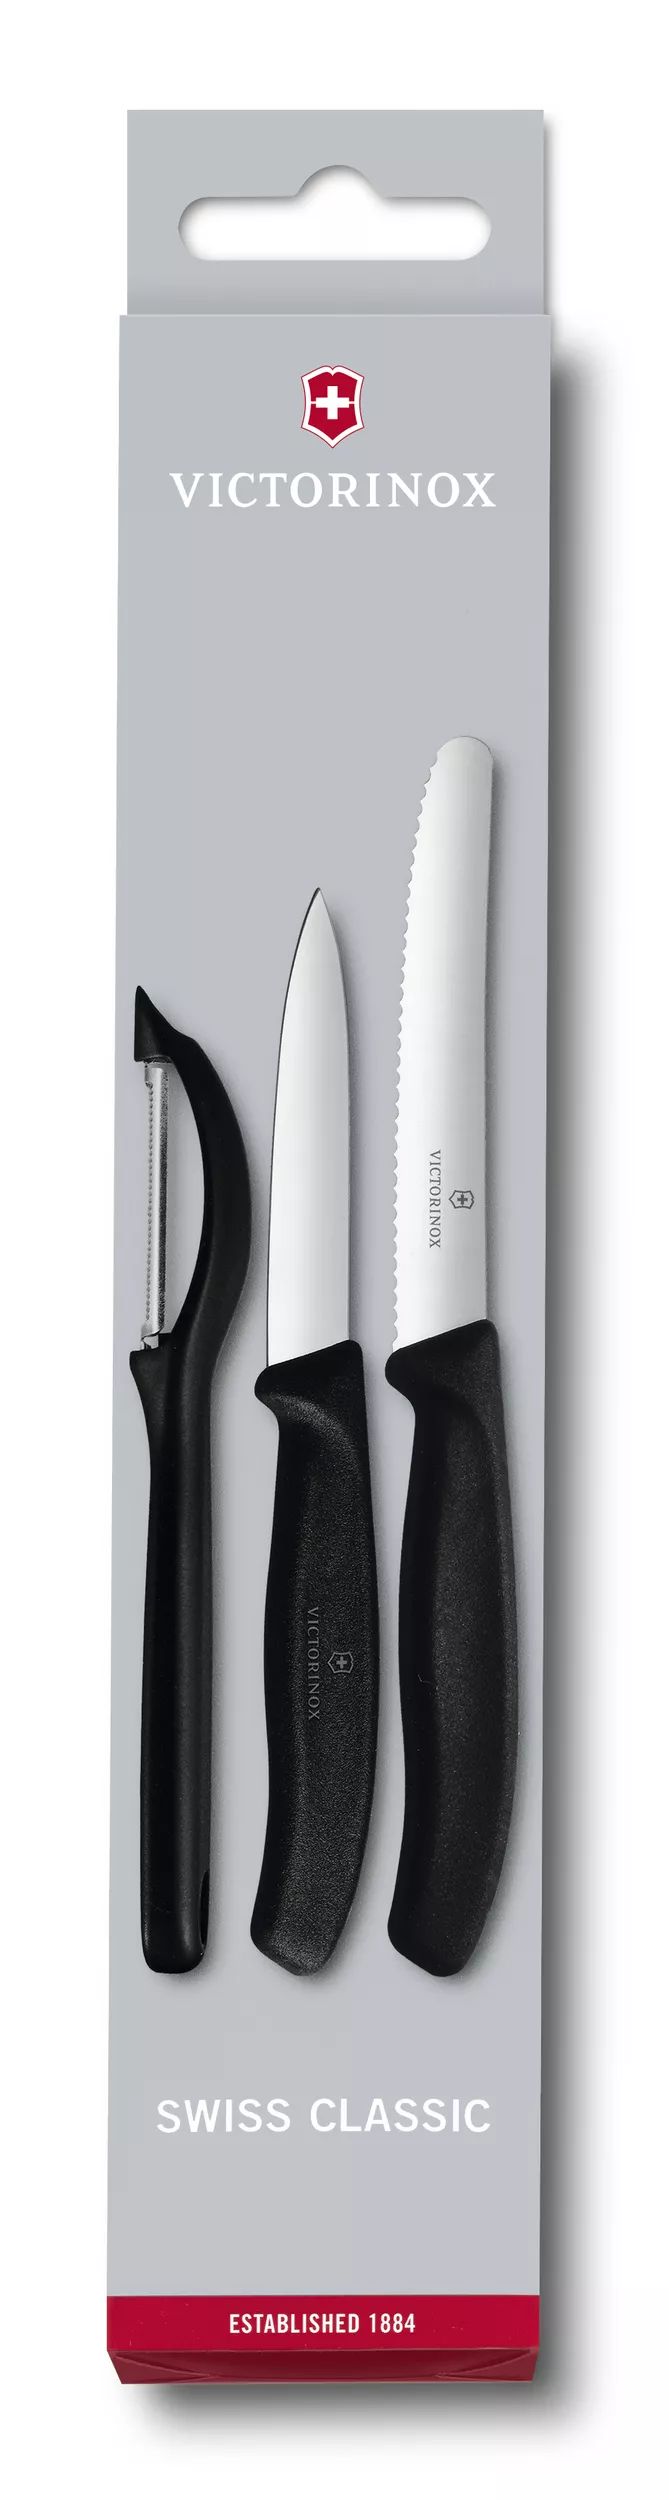 Swiss Classic Paring Knife Set with Peeler, 3 Pieces-6.7113.31